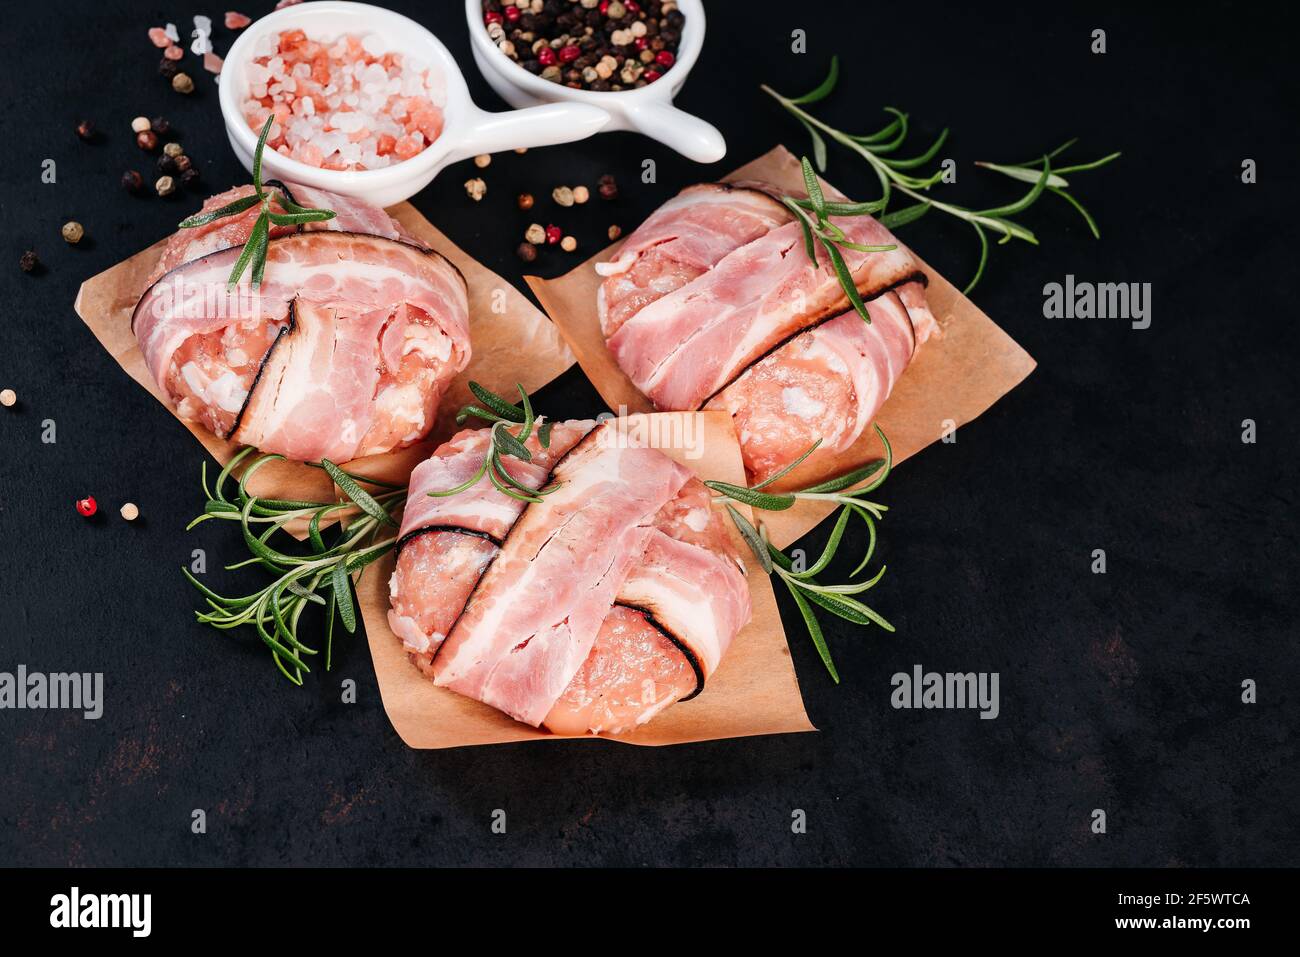 Three chicken hamburgers wrapped in bacon on cave paper with rosemary branches, black pepper and pink salt in white small plates, black background. Fa Stock Photo